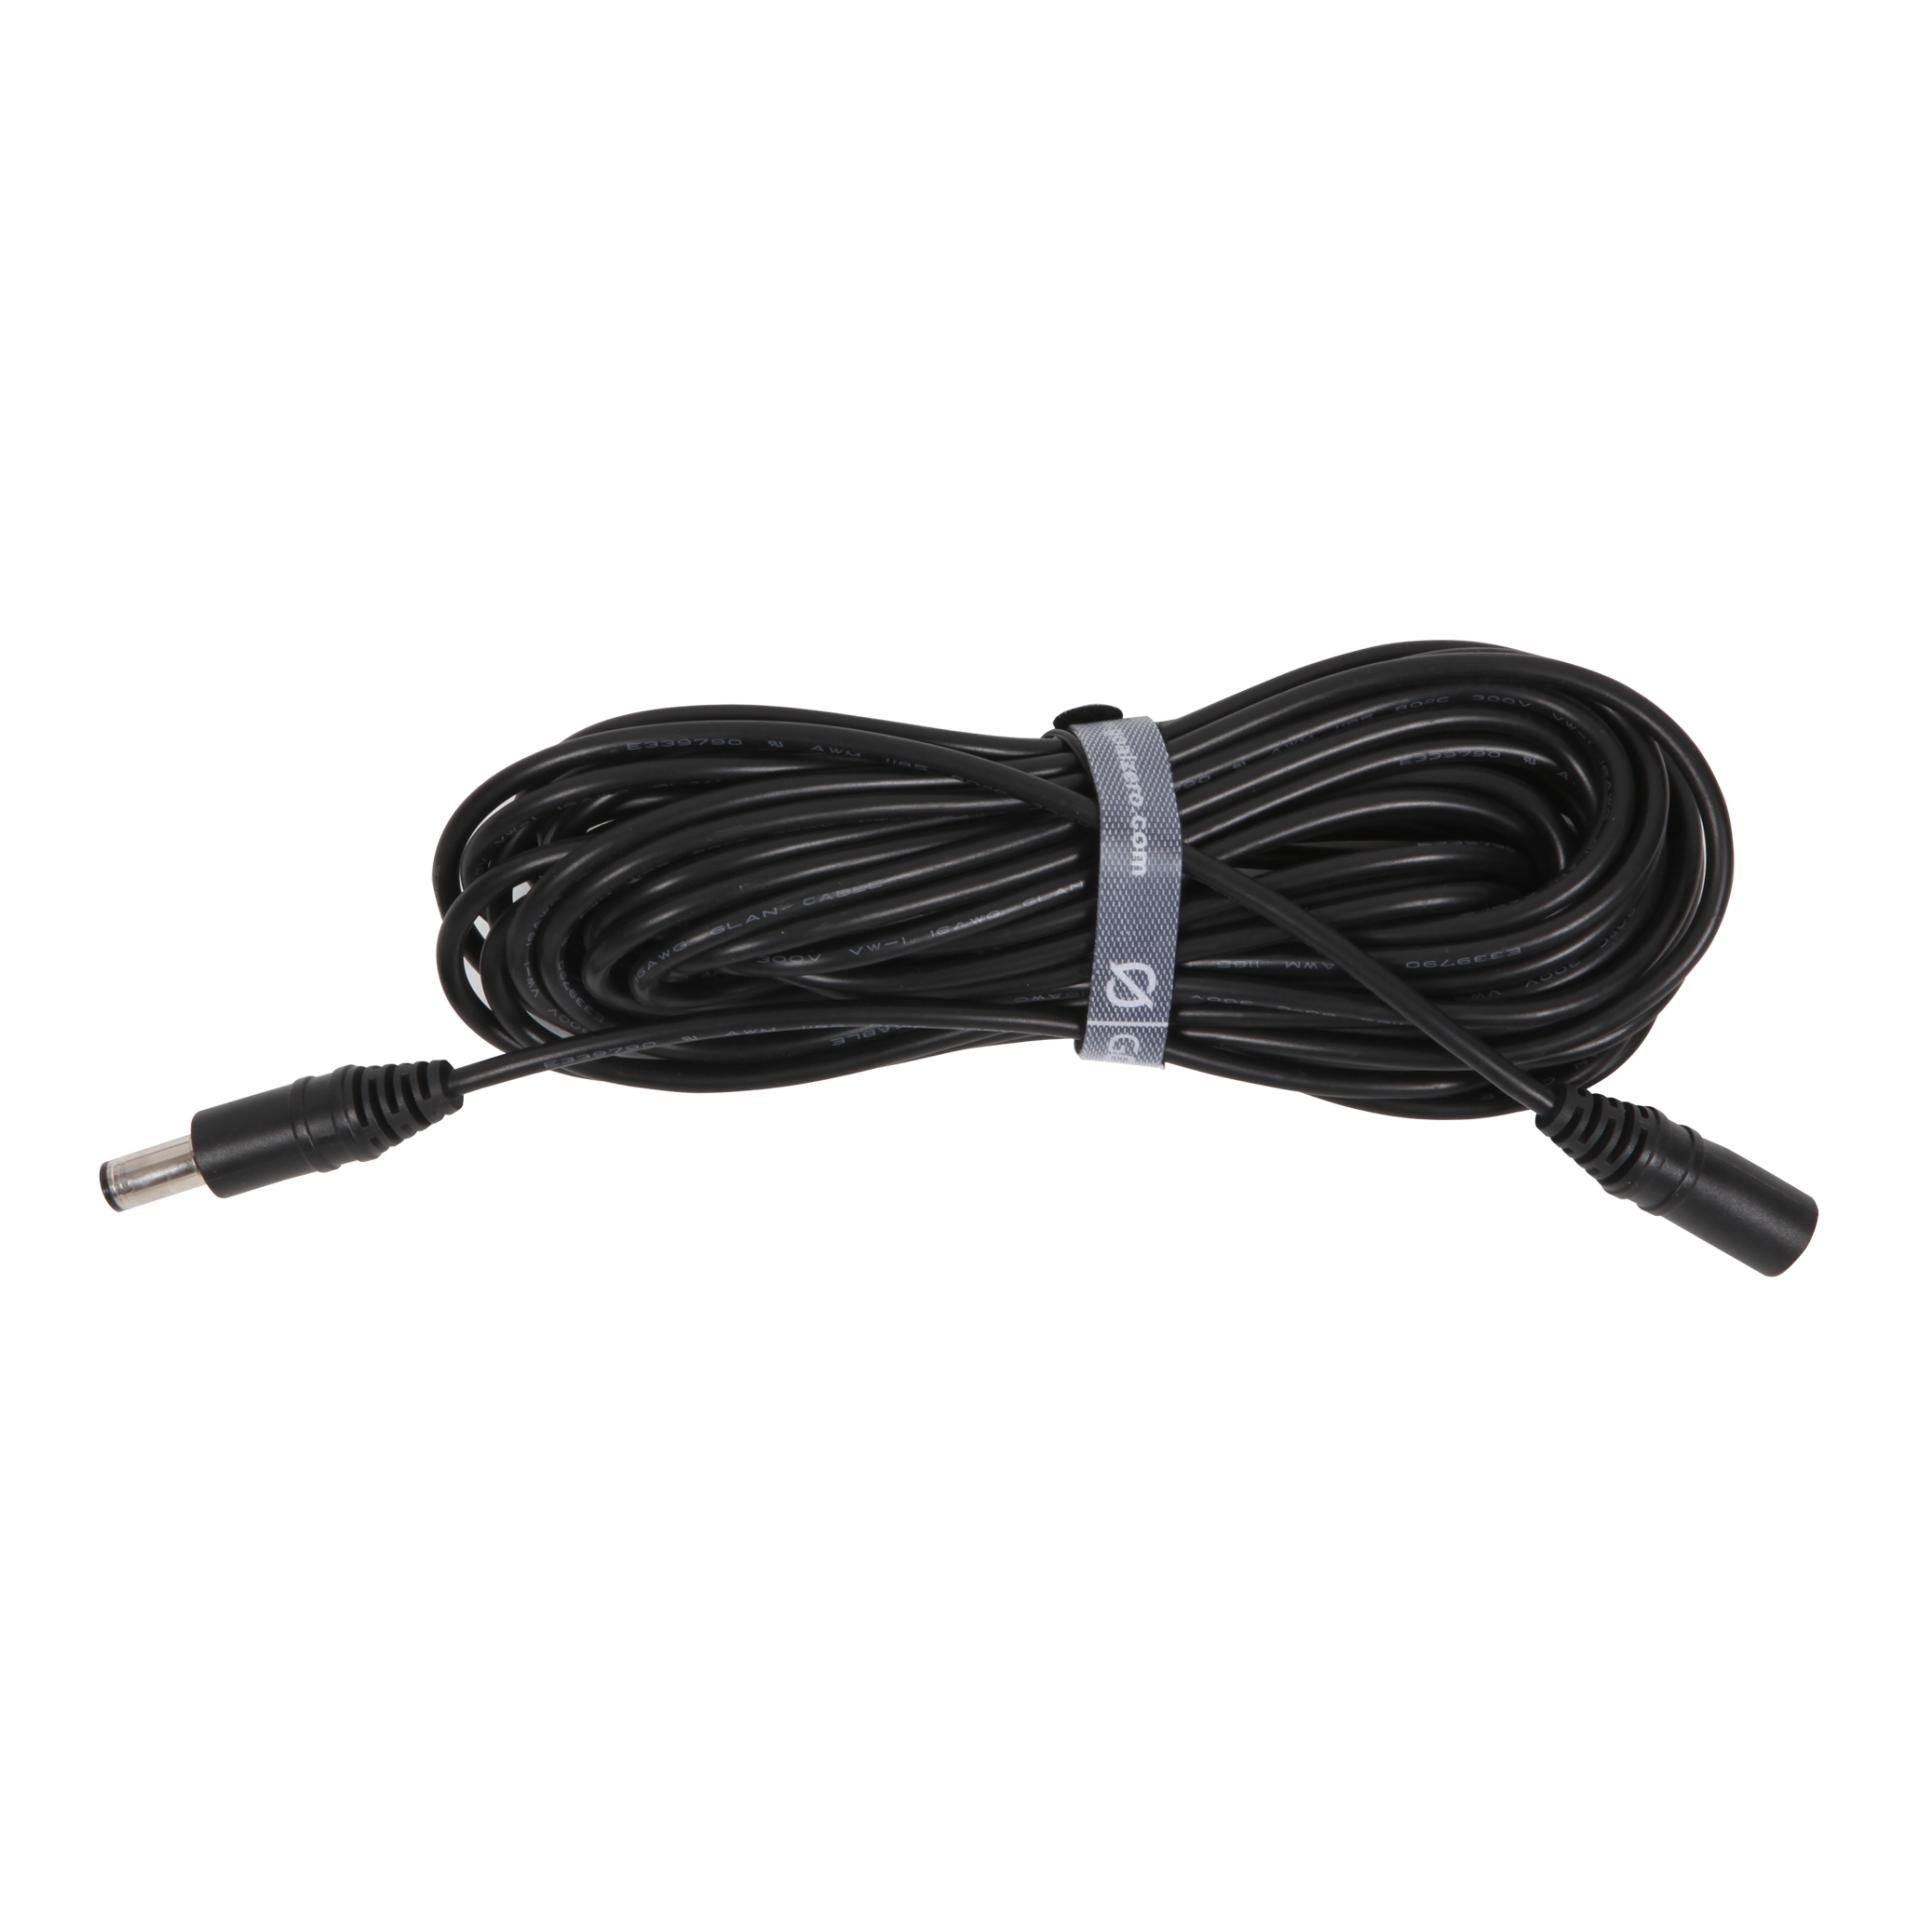 Extension Cable For Solarpanels 8mm - 9m long